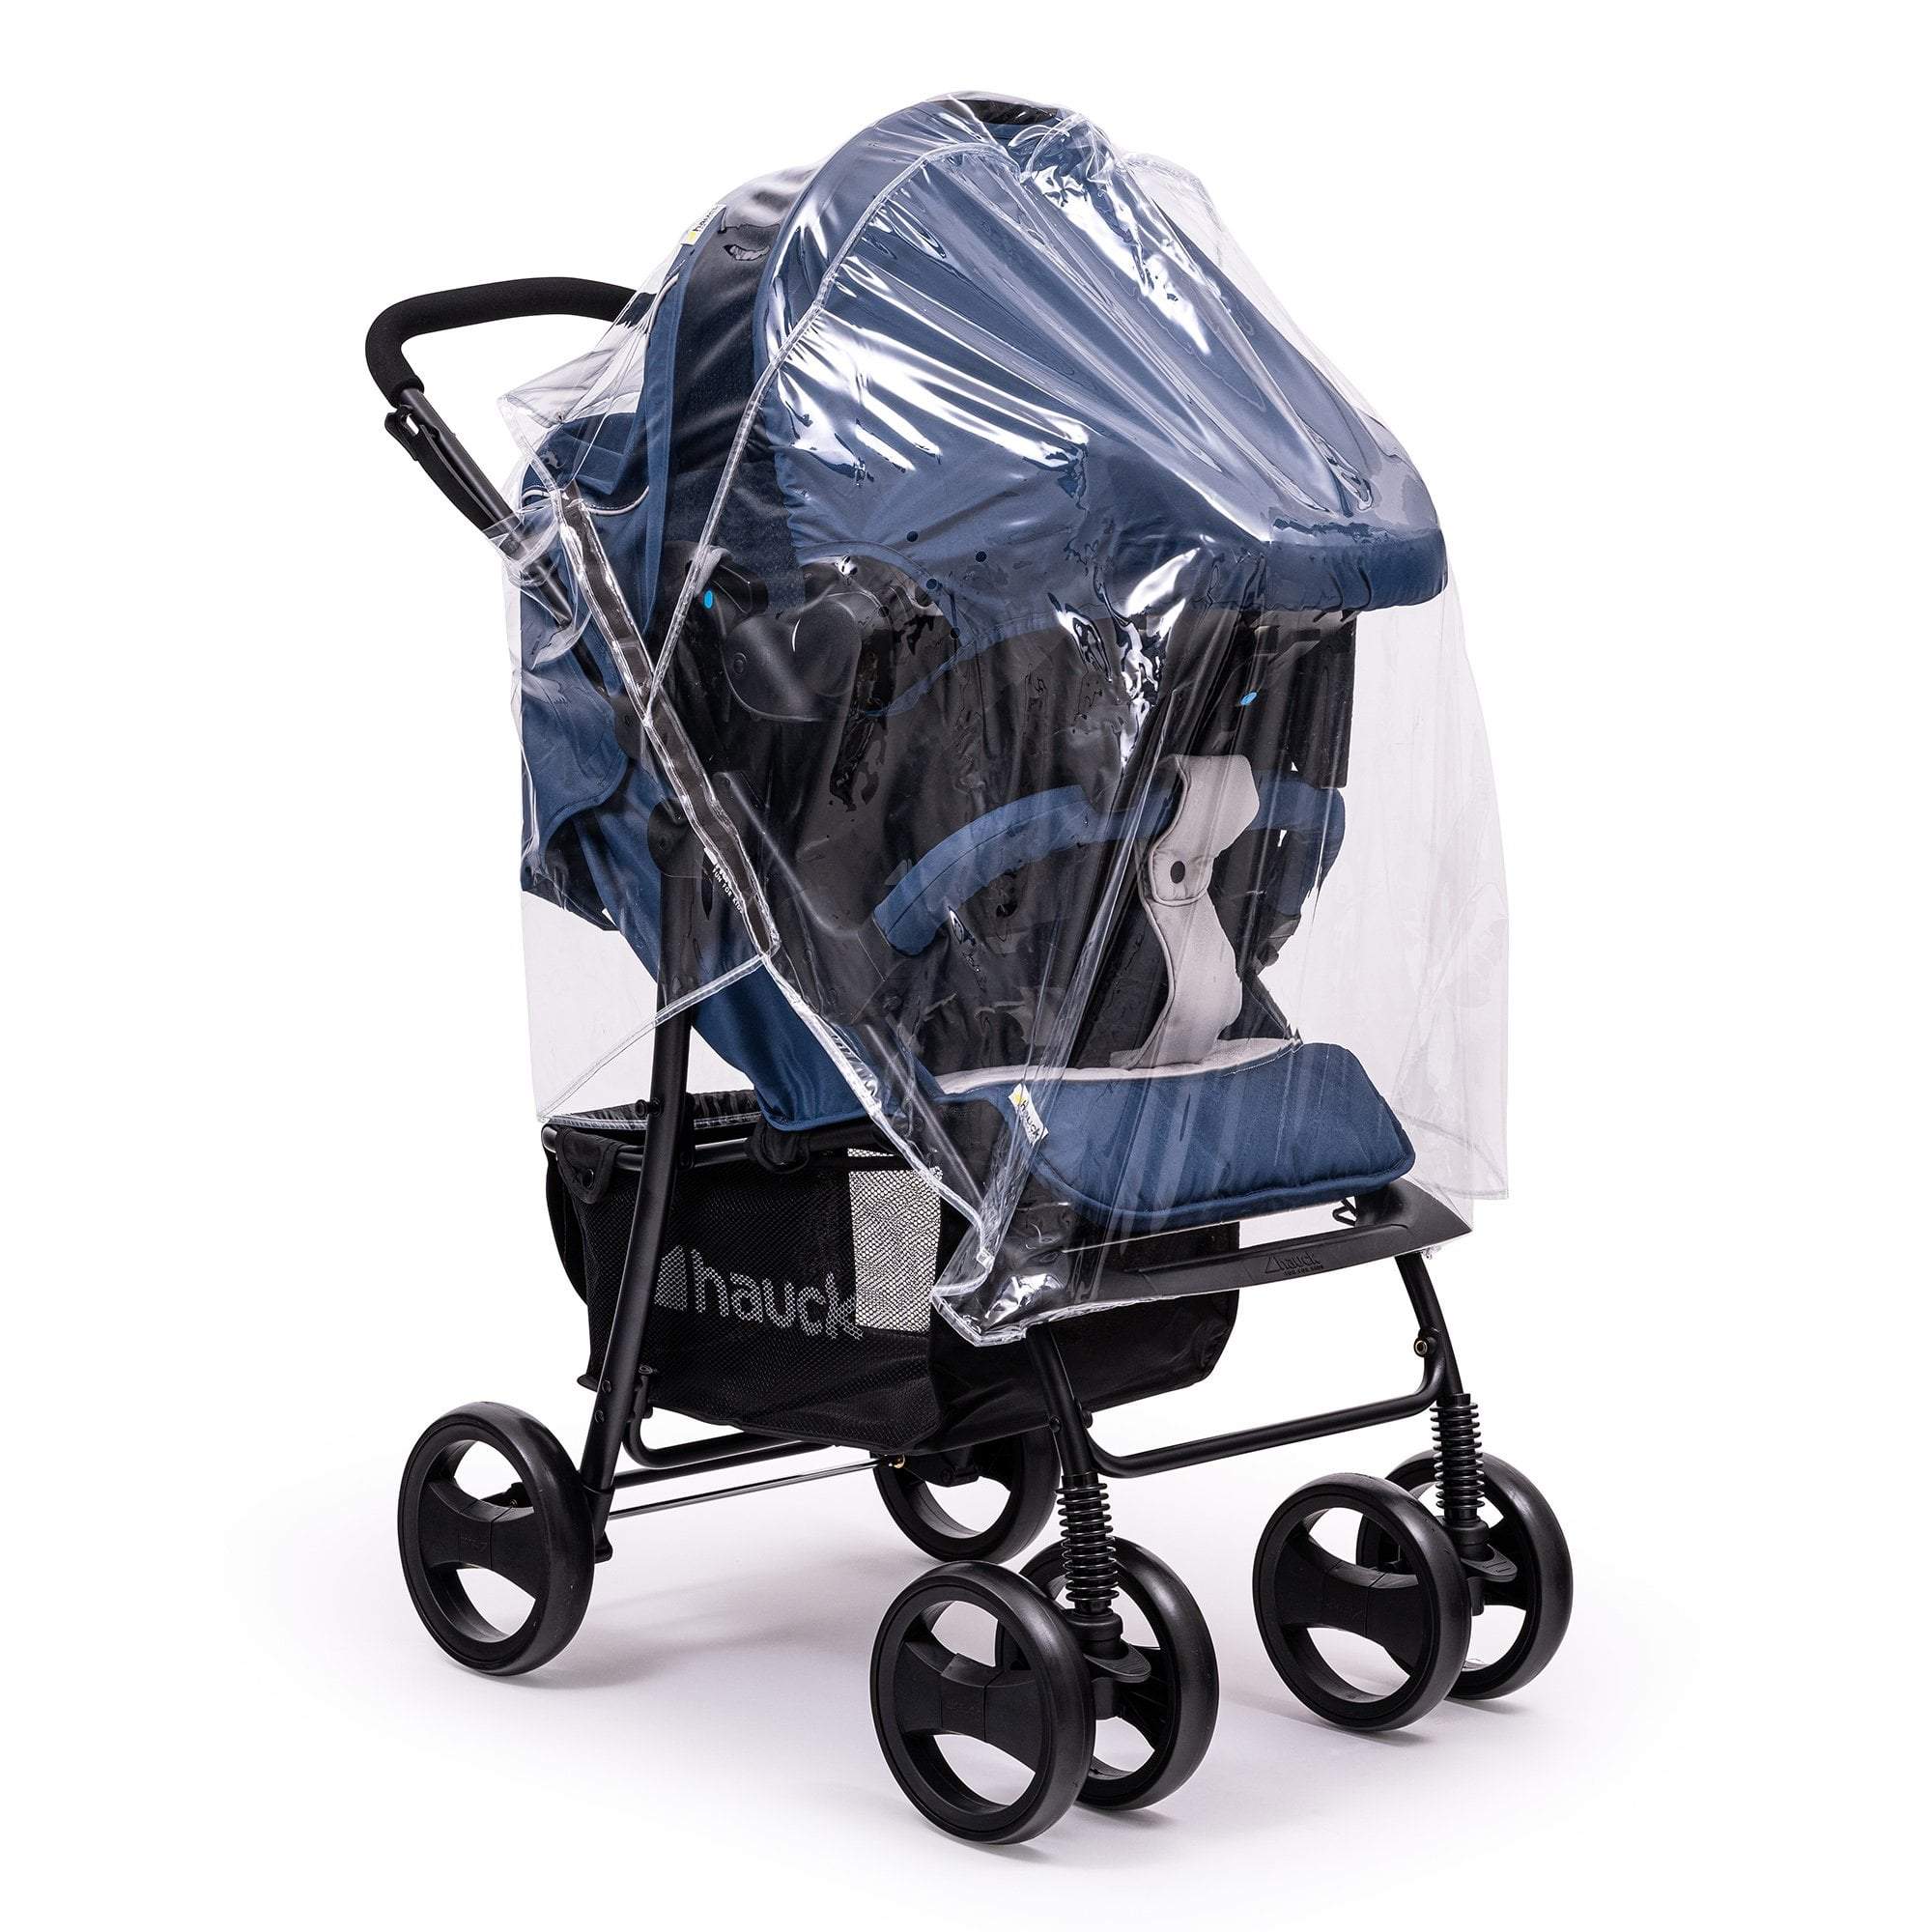 Travel System Raincover Compatible with Cam - Fits All Models - For Your Little One